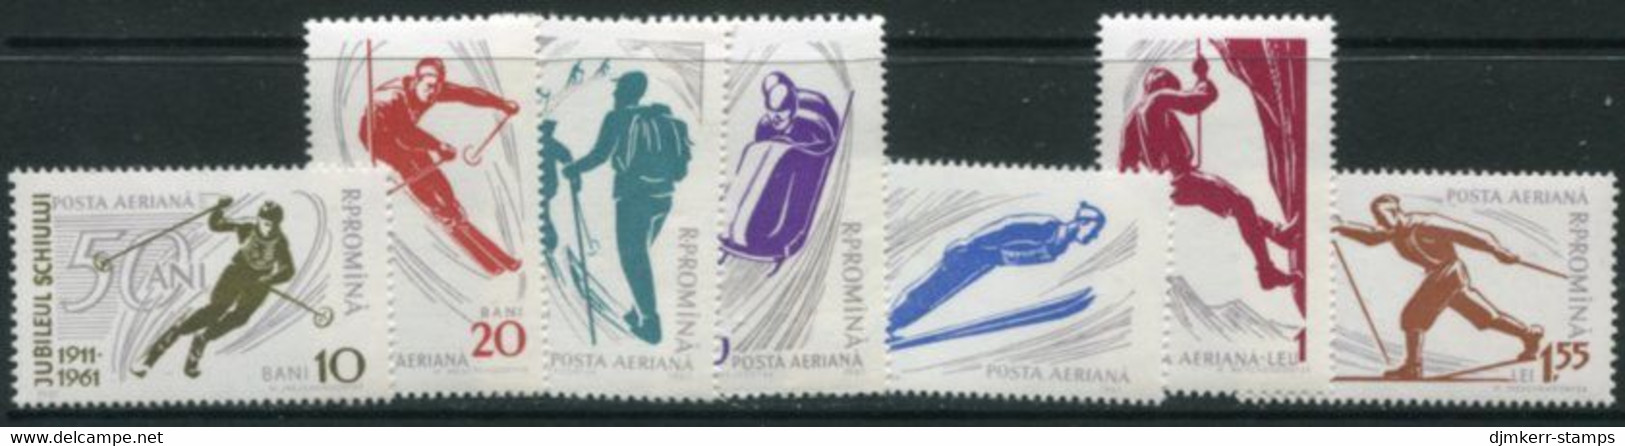 ROMANIA 1961 Winter Sports Perforated LHM / *.  Michel 1951-57 - Neufs